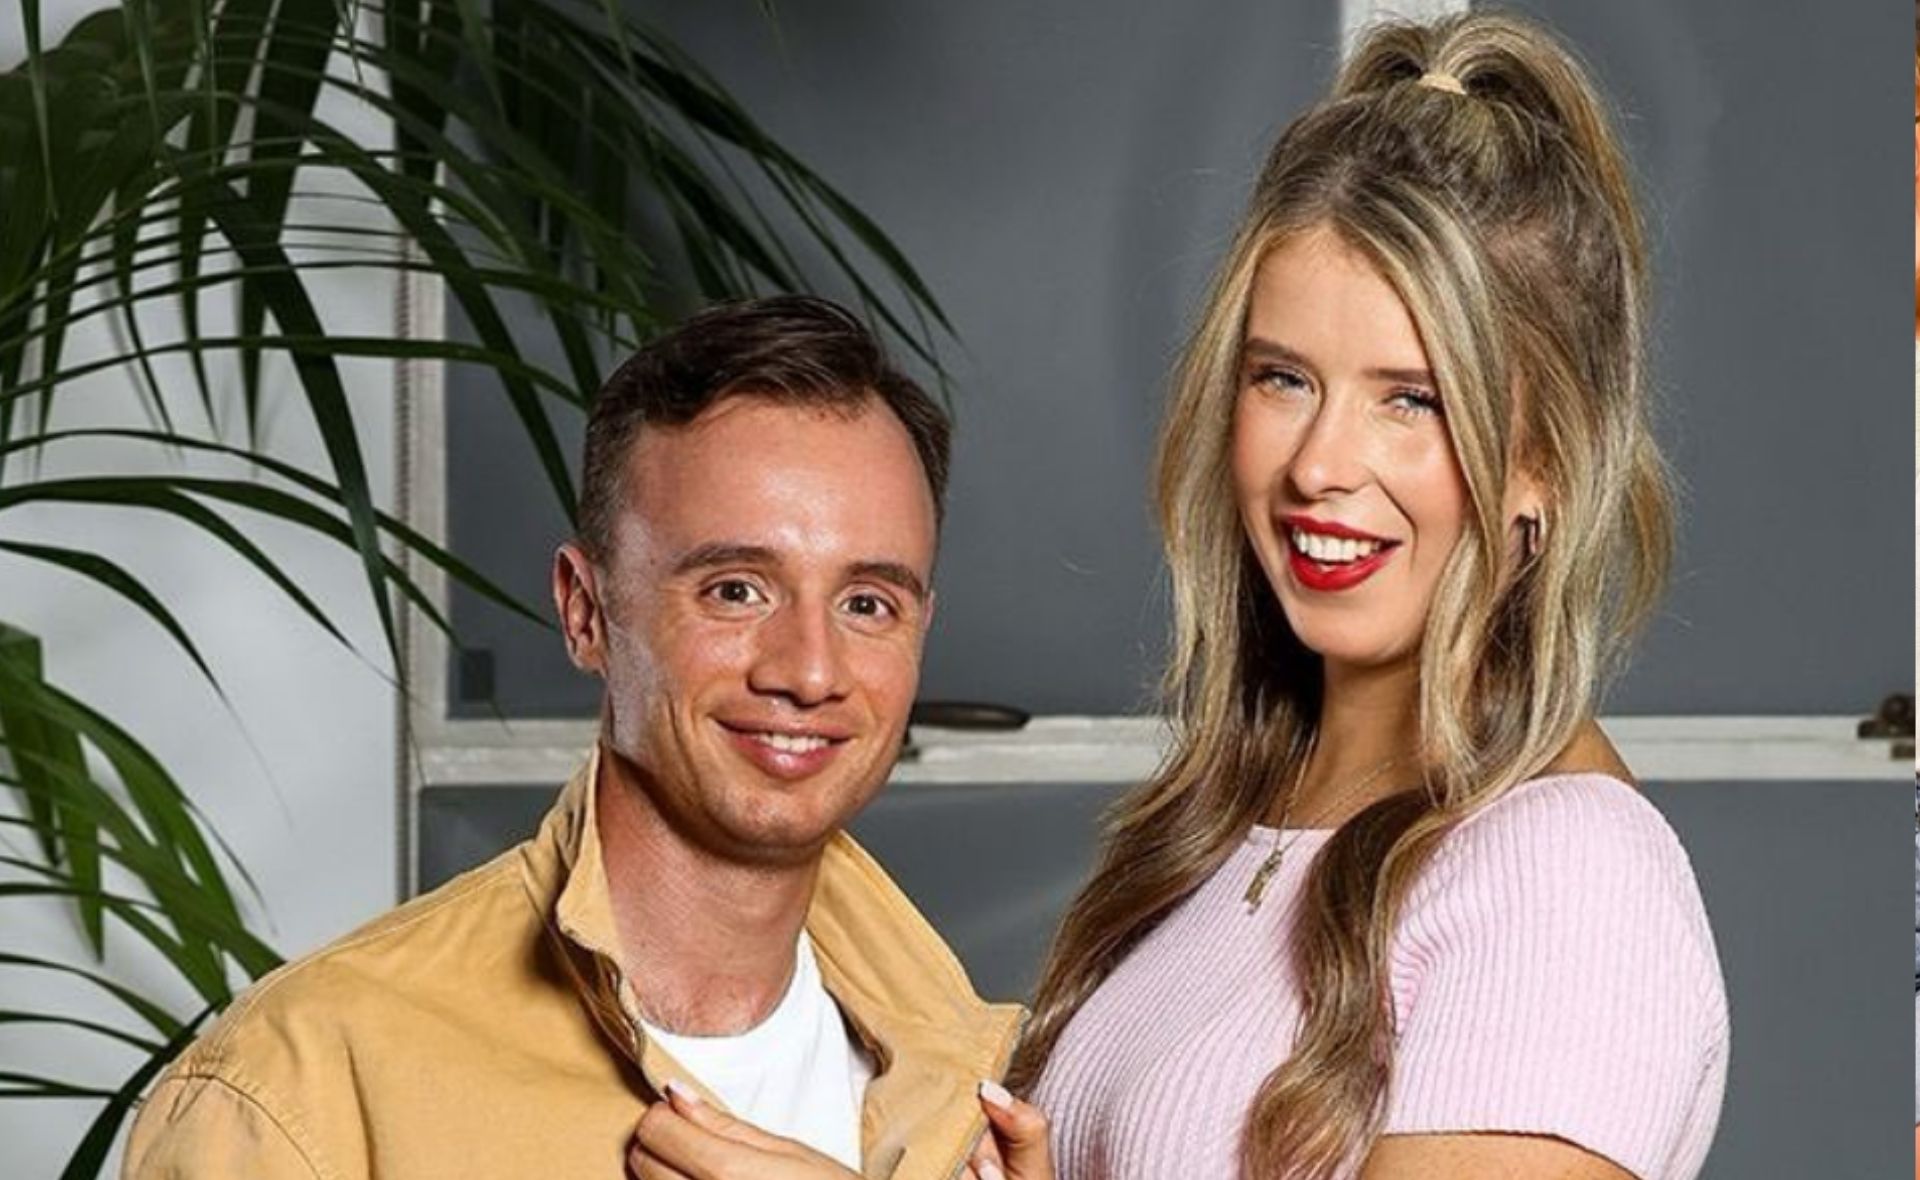 Congratulations! Lachlan and Kiera are crowned the winners of Beauty and the Geek 2021